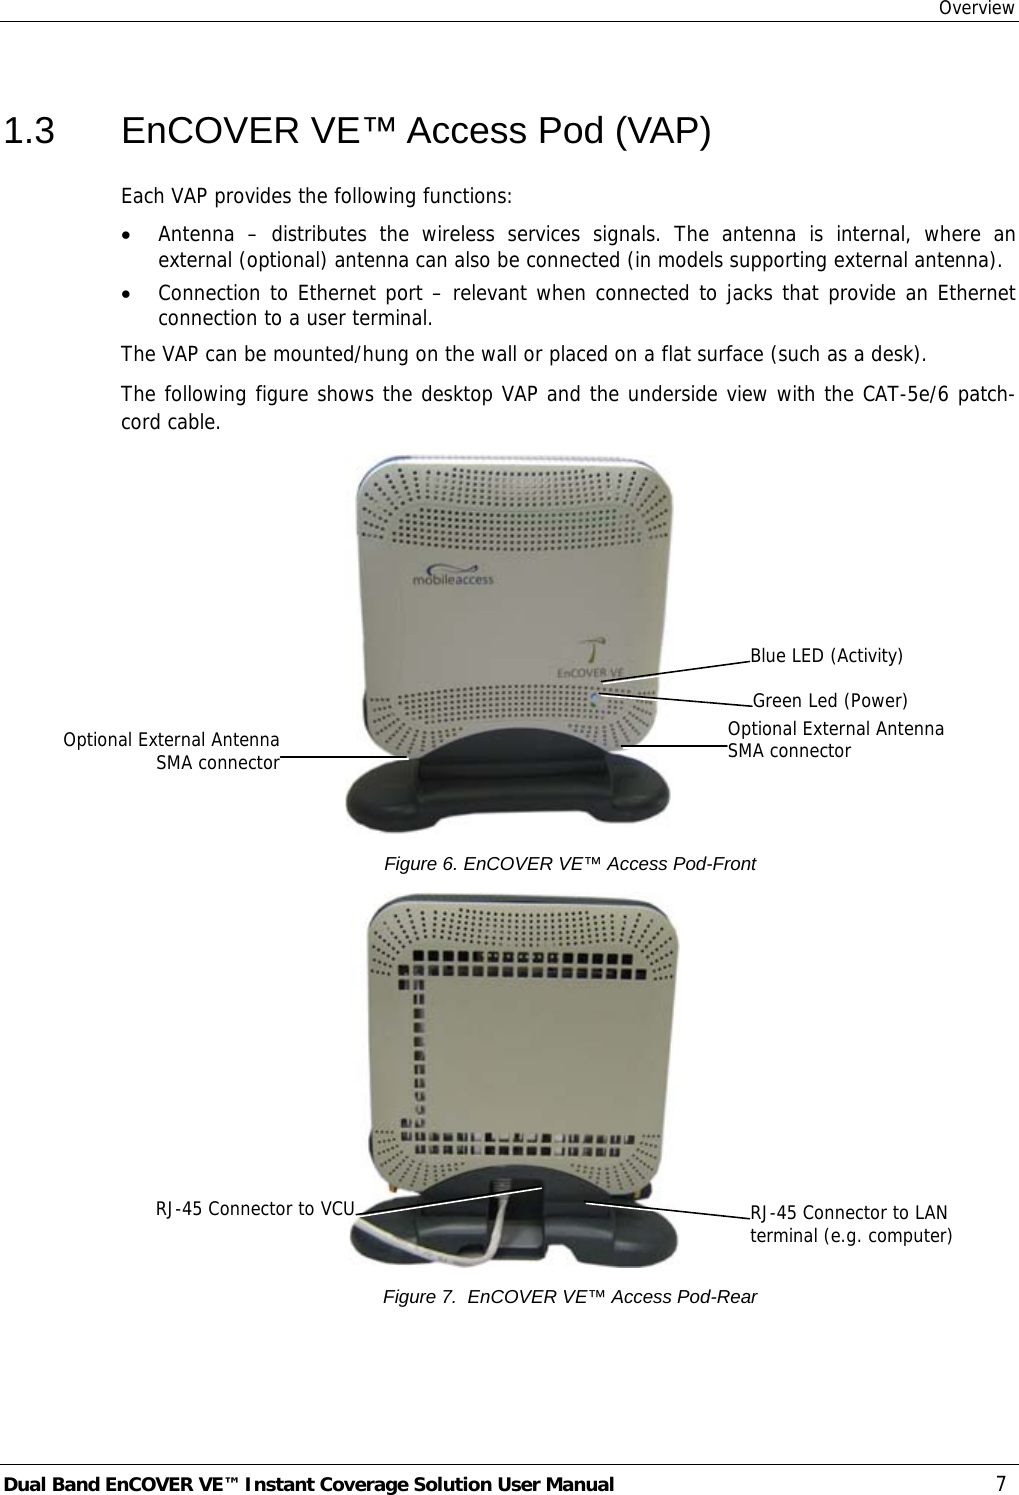 Overview Dual Band EnCOVER VE™ Instant Coverage Solution User Manual  7 1.3  EnCOVER VE™ Access Pod (VAP) Each VAP provides the following functions: • Antenna – distributes the wireless services signals. The antenna is internal, where an external (optional) antenna can also be connected (in models supporting external antenna). • Connection to Ethernet port – relevant when connected to jacks that provide an Ethernet connection to a user terminal. The VAP can be mounted/hung on the wall or placed on a flat surface (such as a desk).  The following figure shows the desktop VAP and the underside view with the CAT-5e/6 patch-cord cable.   Figure 6. EnCOVER VE™ Access Pod-Front   Figure 7.  EnCOVER VE™ Access Pod-Rear RJ-45 Connector to LAN terminal (e.g. computer) RJ-45 Connector to VCUBlue LED (Activity) Green Led (Power) Optional External Antenna SMA connector Optional External AntennaSMA connector